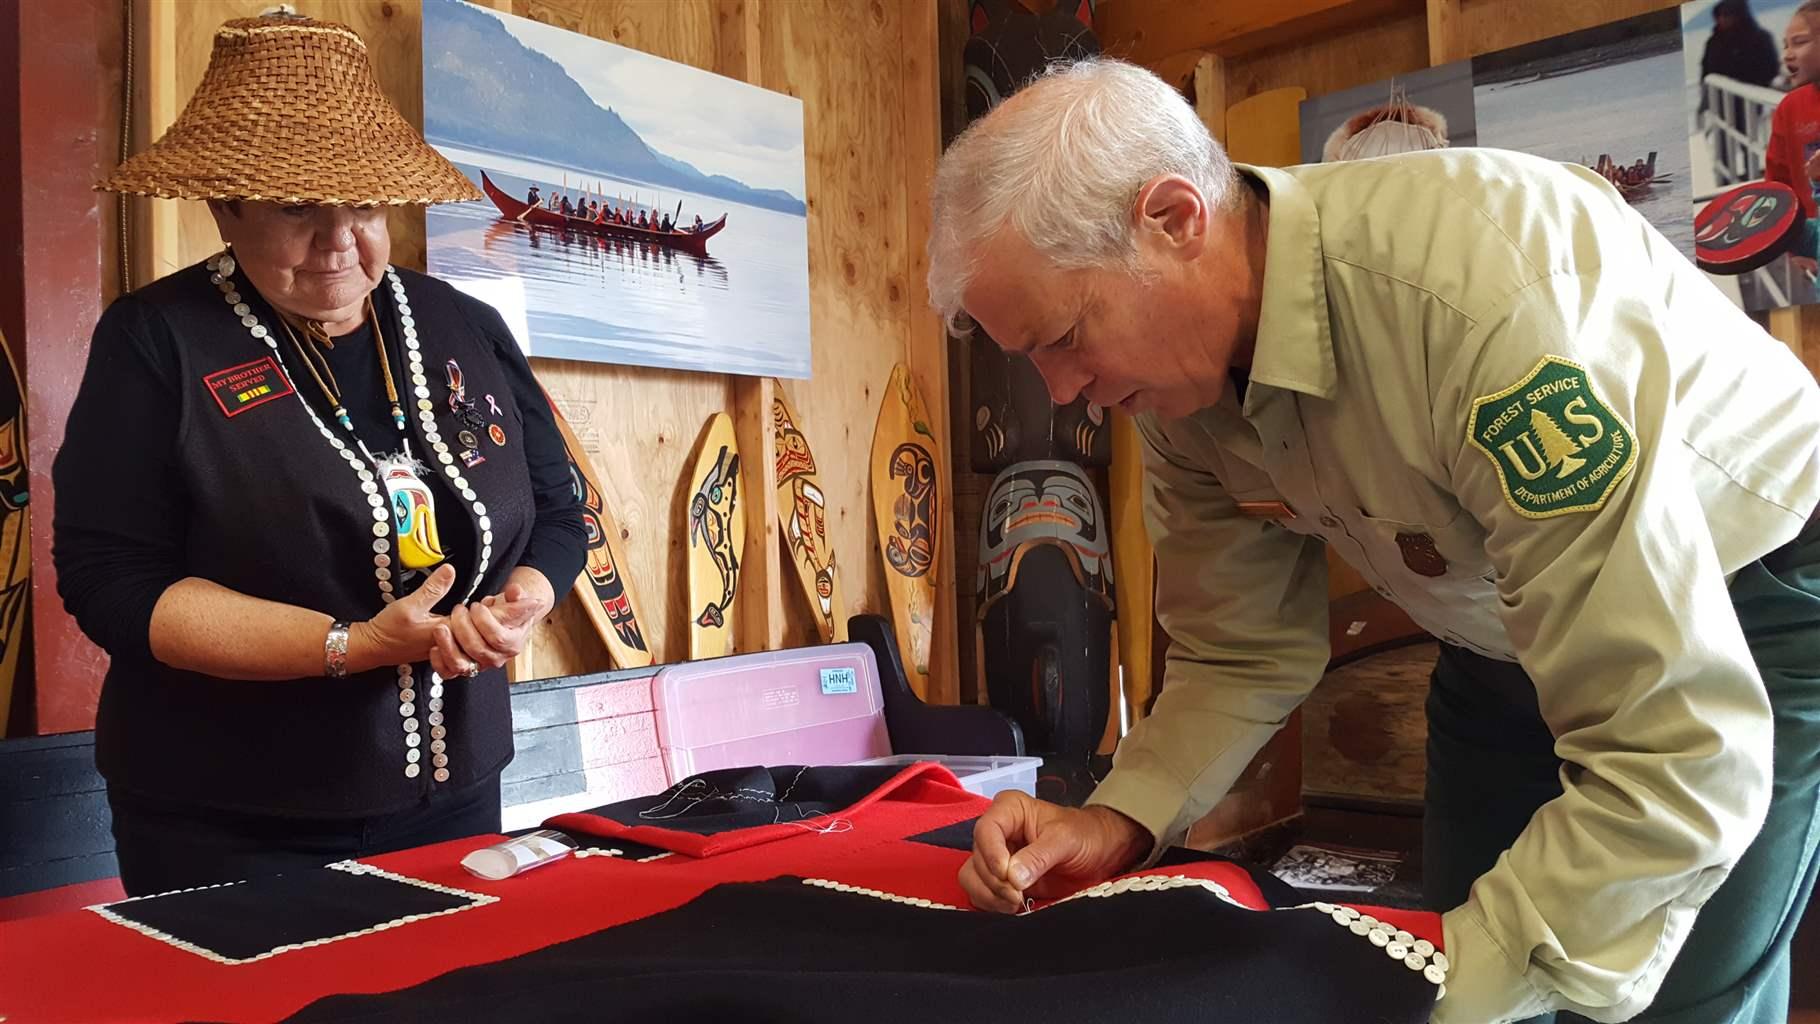 Charles Streuli sews a button onto a Tlingit blanket made to represent the healing process between the tribes.